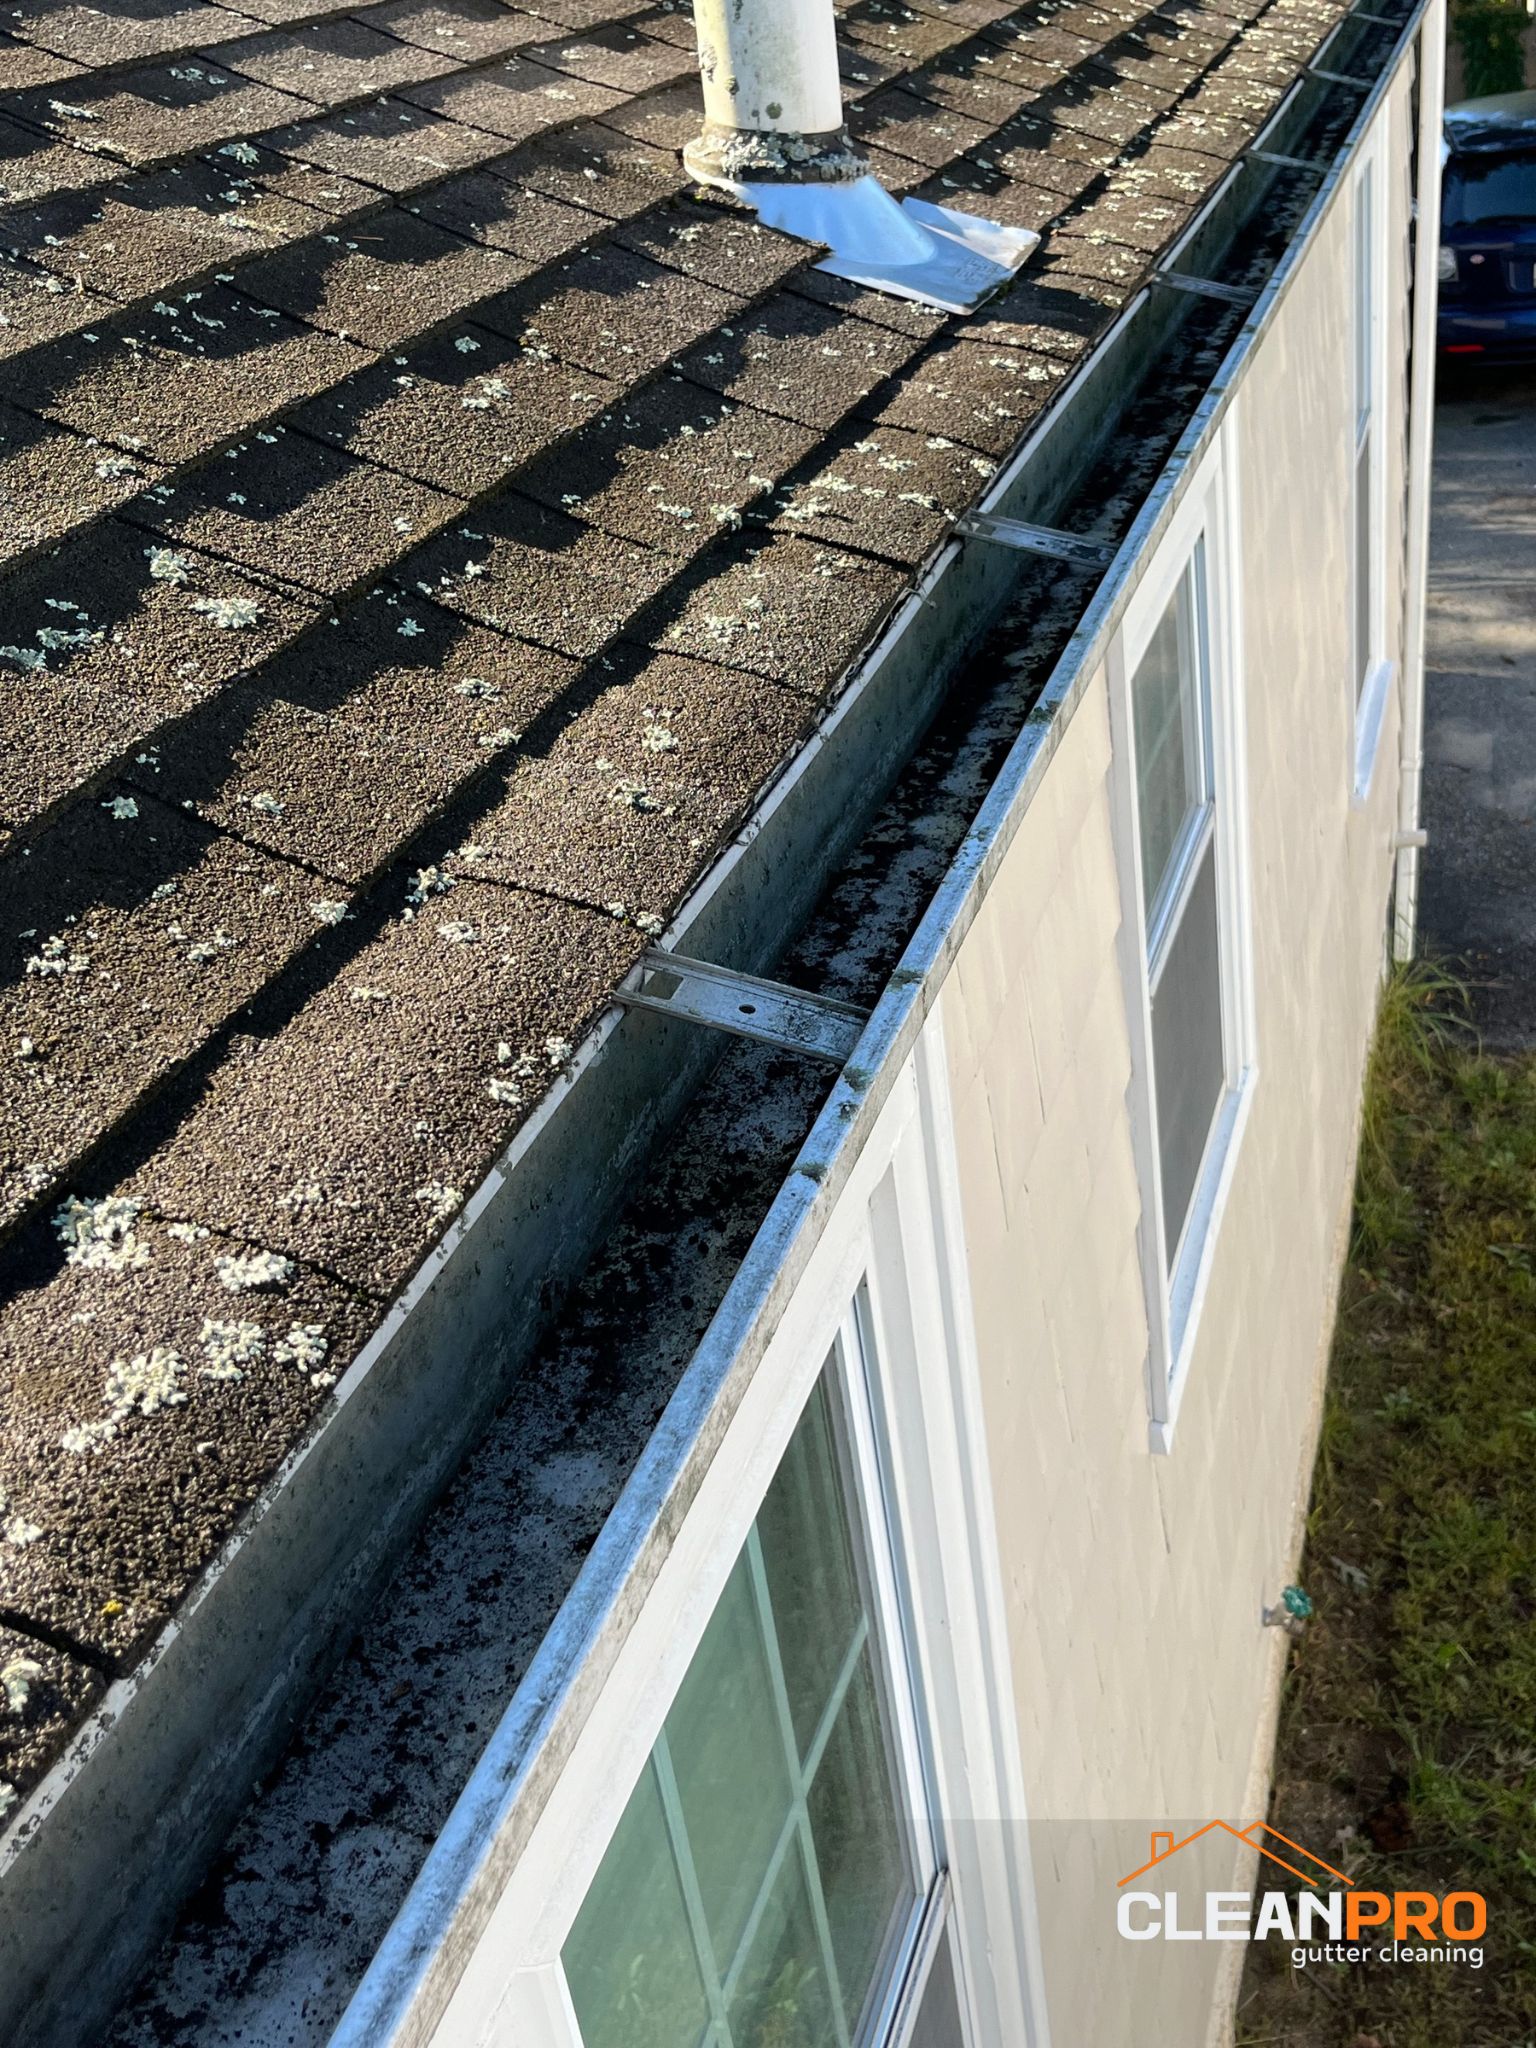 Quality Gutter Cleaning in Milwaukee WI